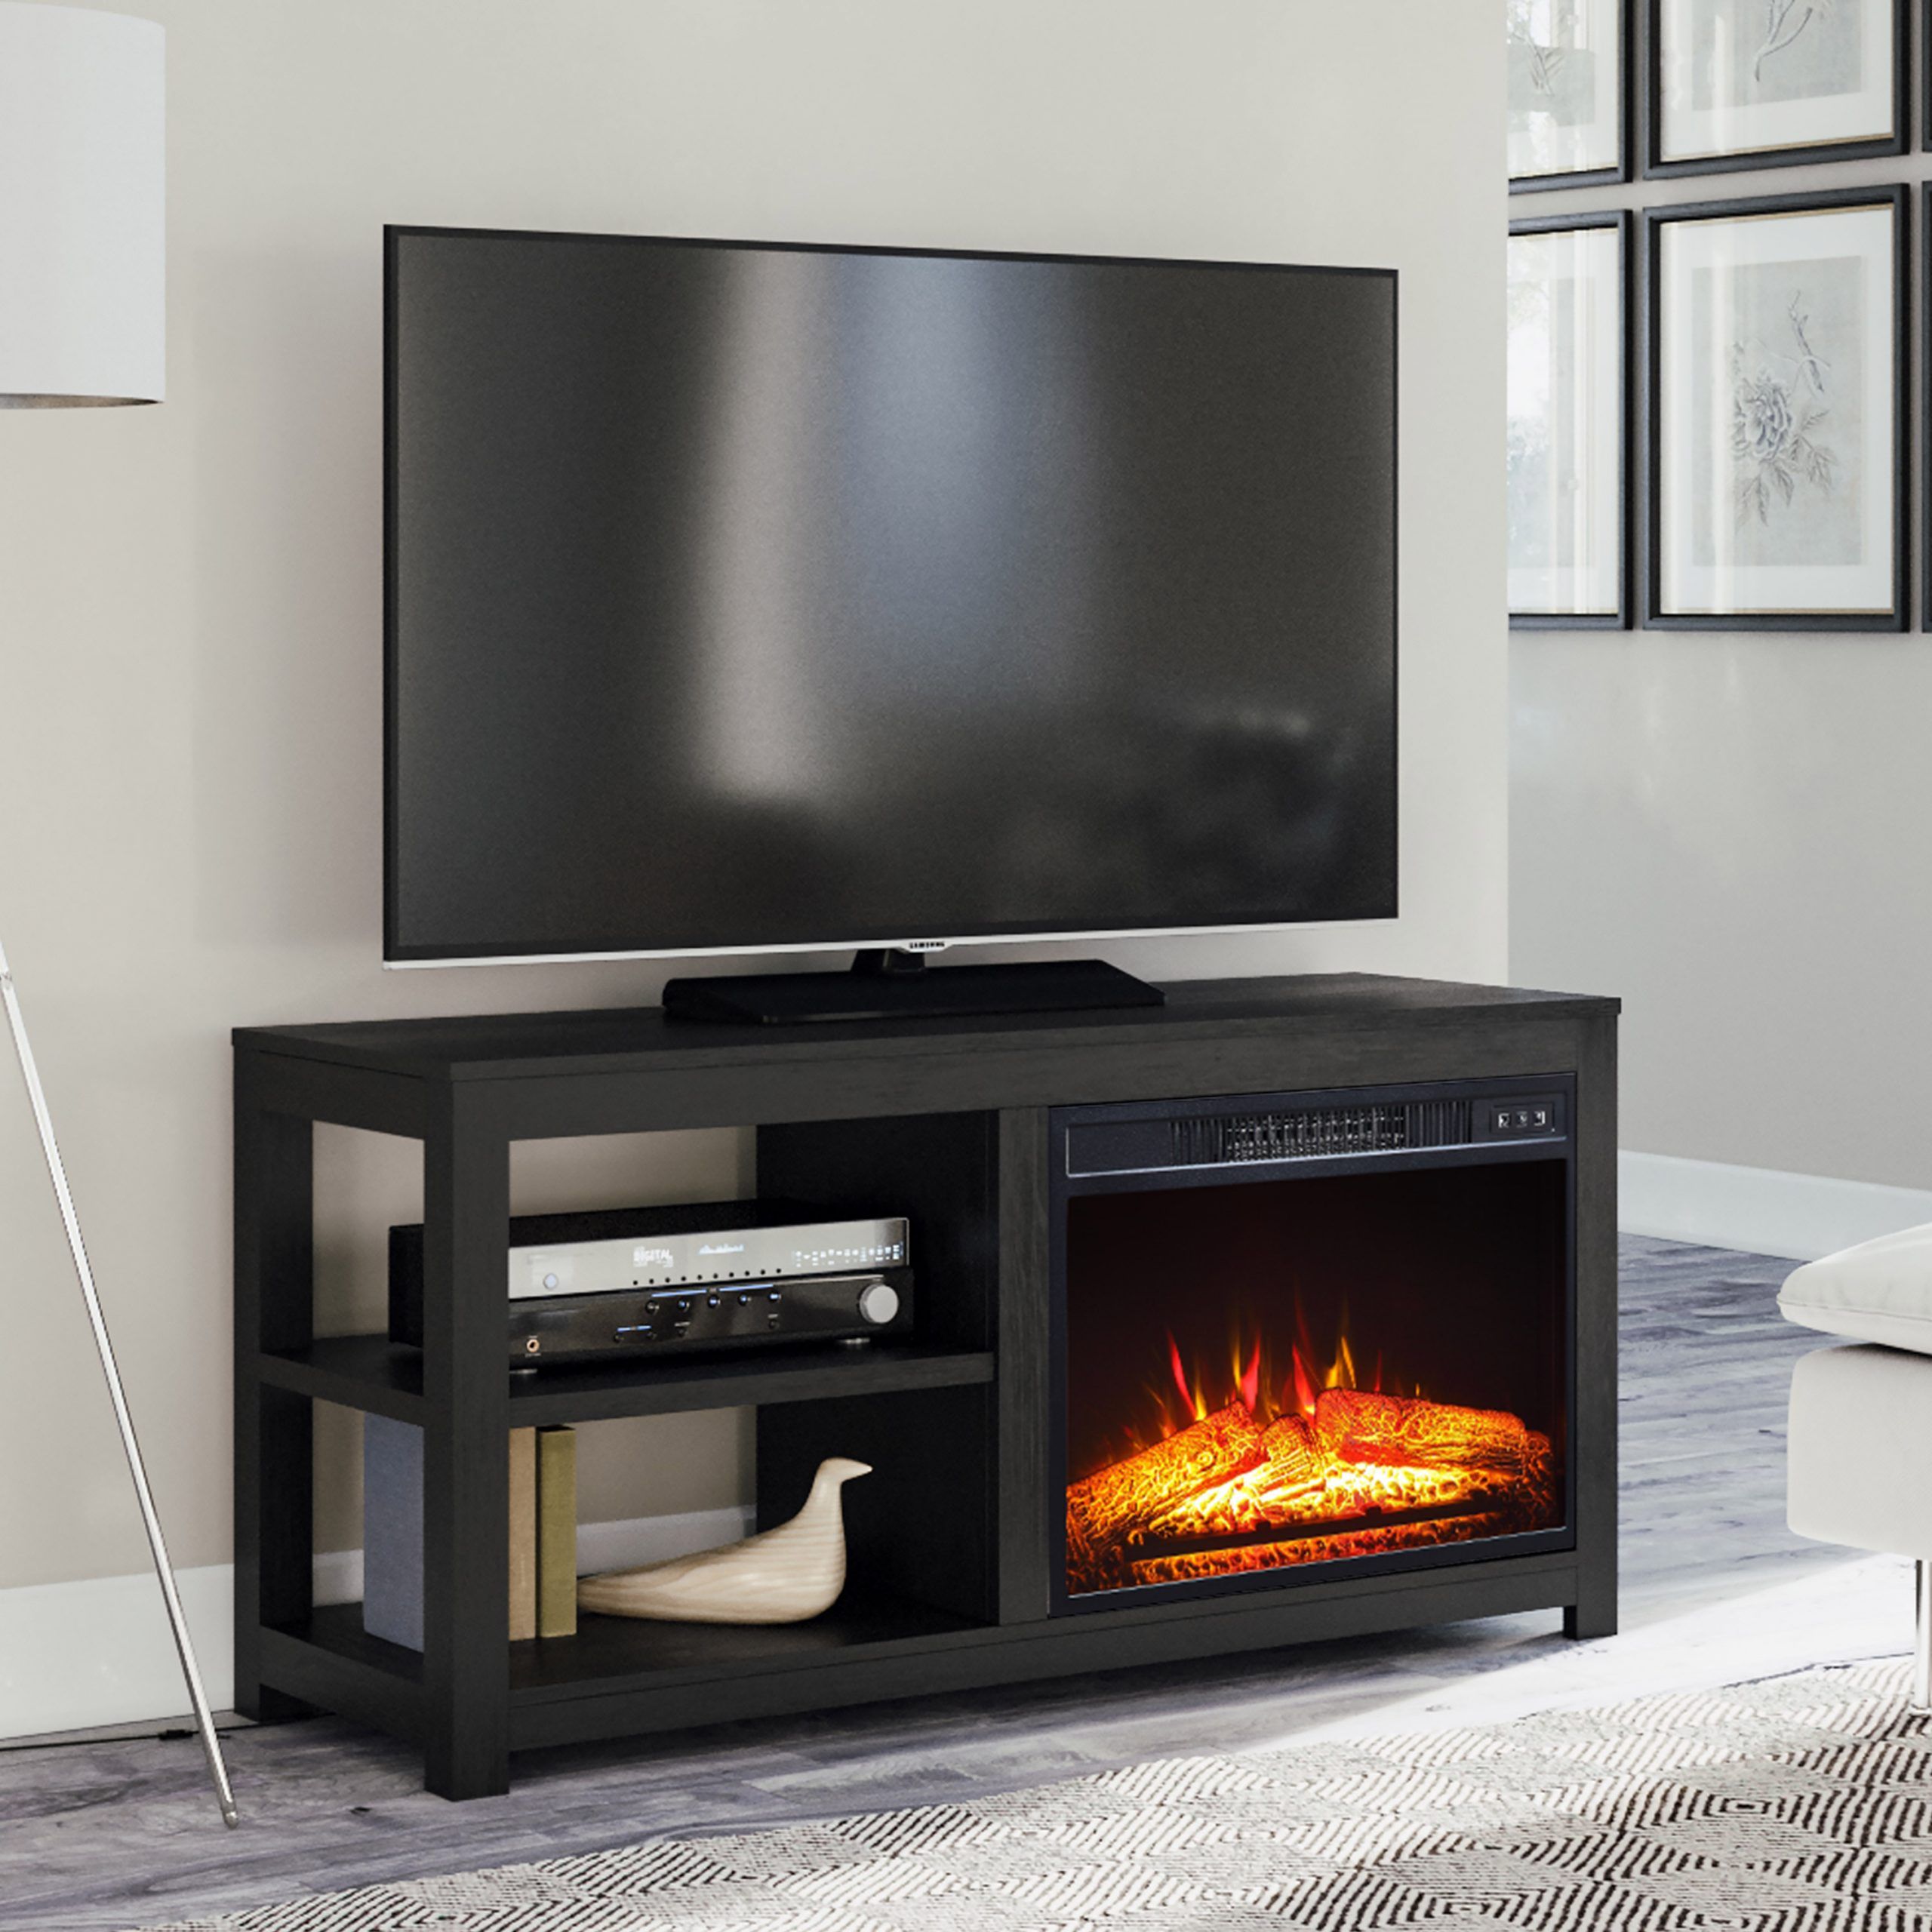 Mainstays 2 Shelf Media Fireplace Tv Stand For Flat Panel Pertaining To Adayah Tv Stands For Tvs Up To 60" (View 7 of 15)